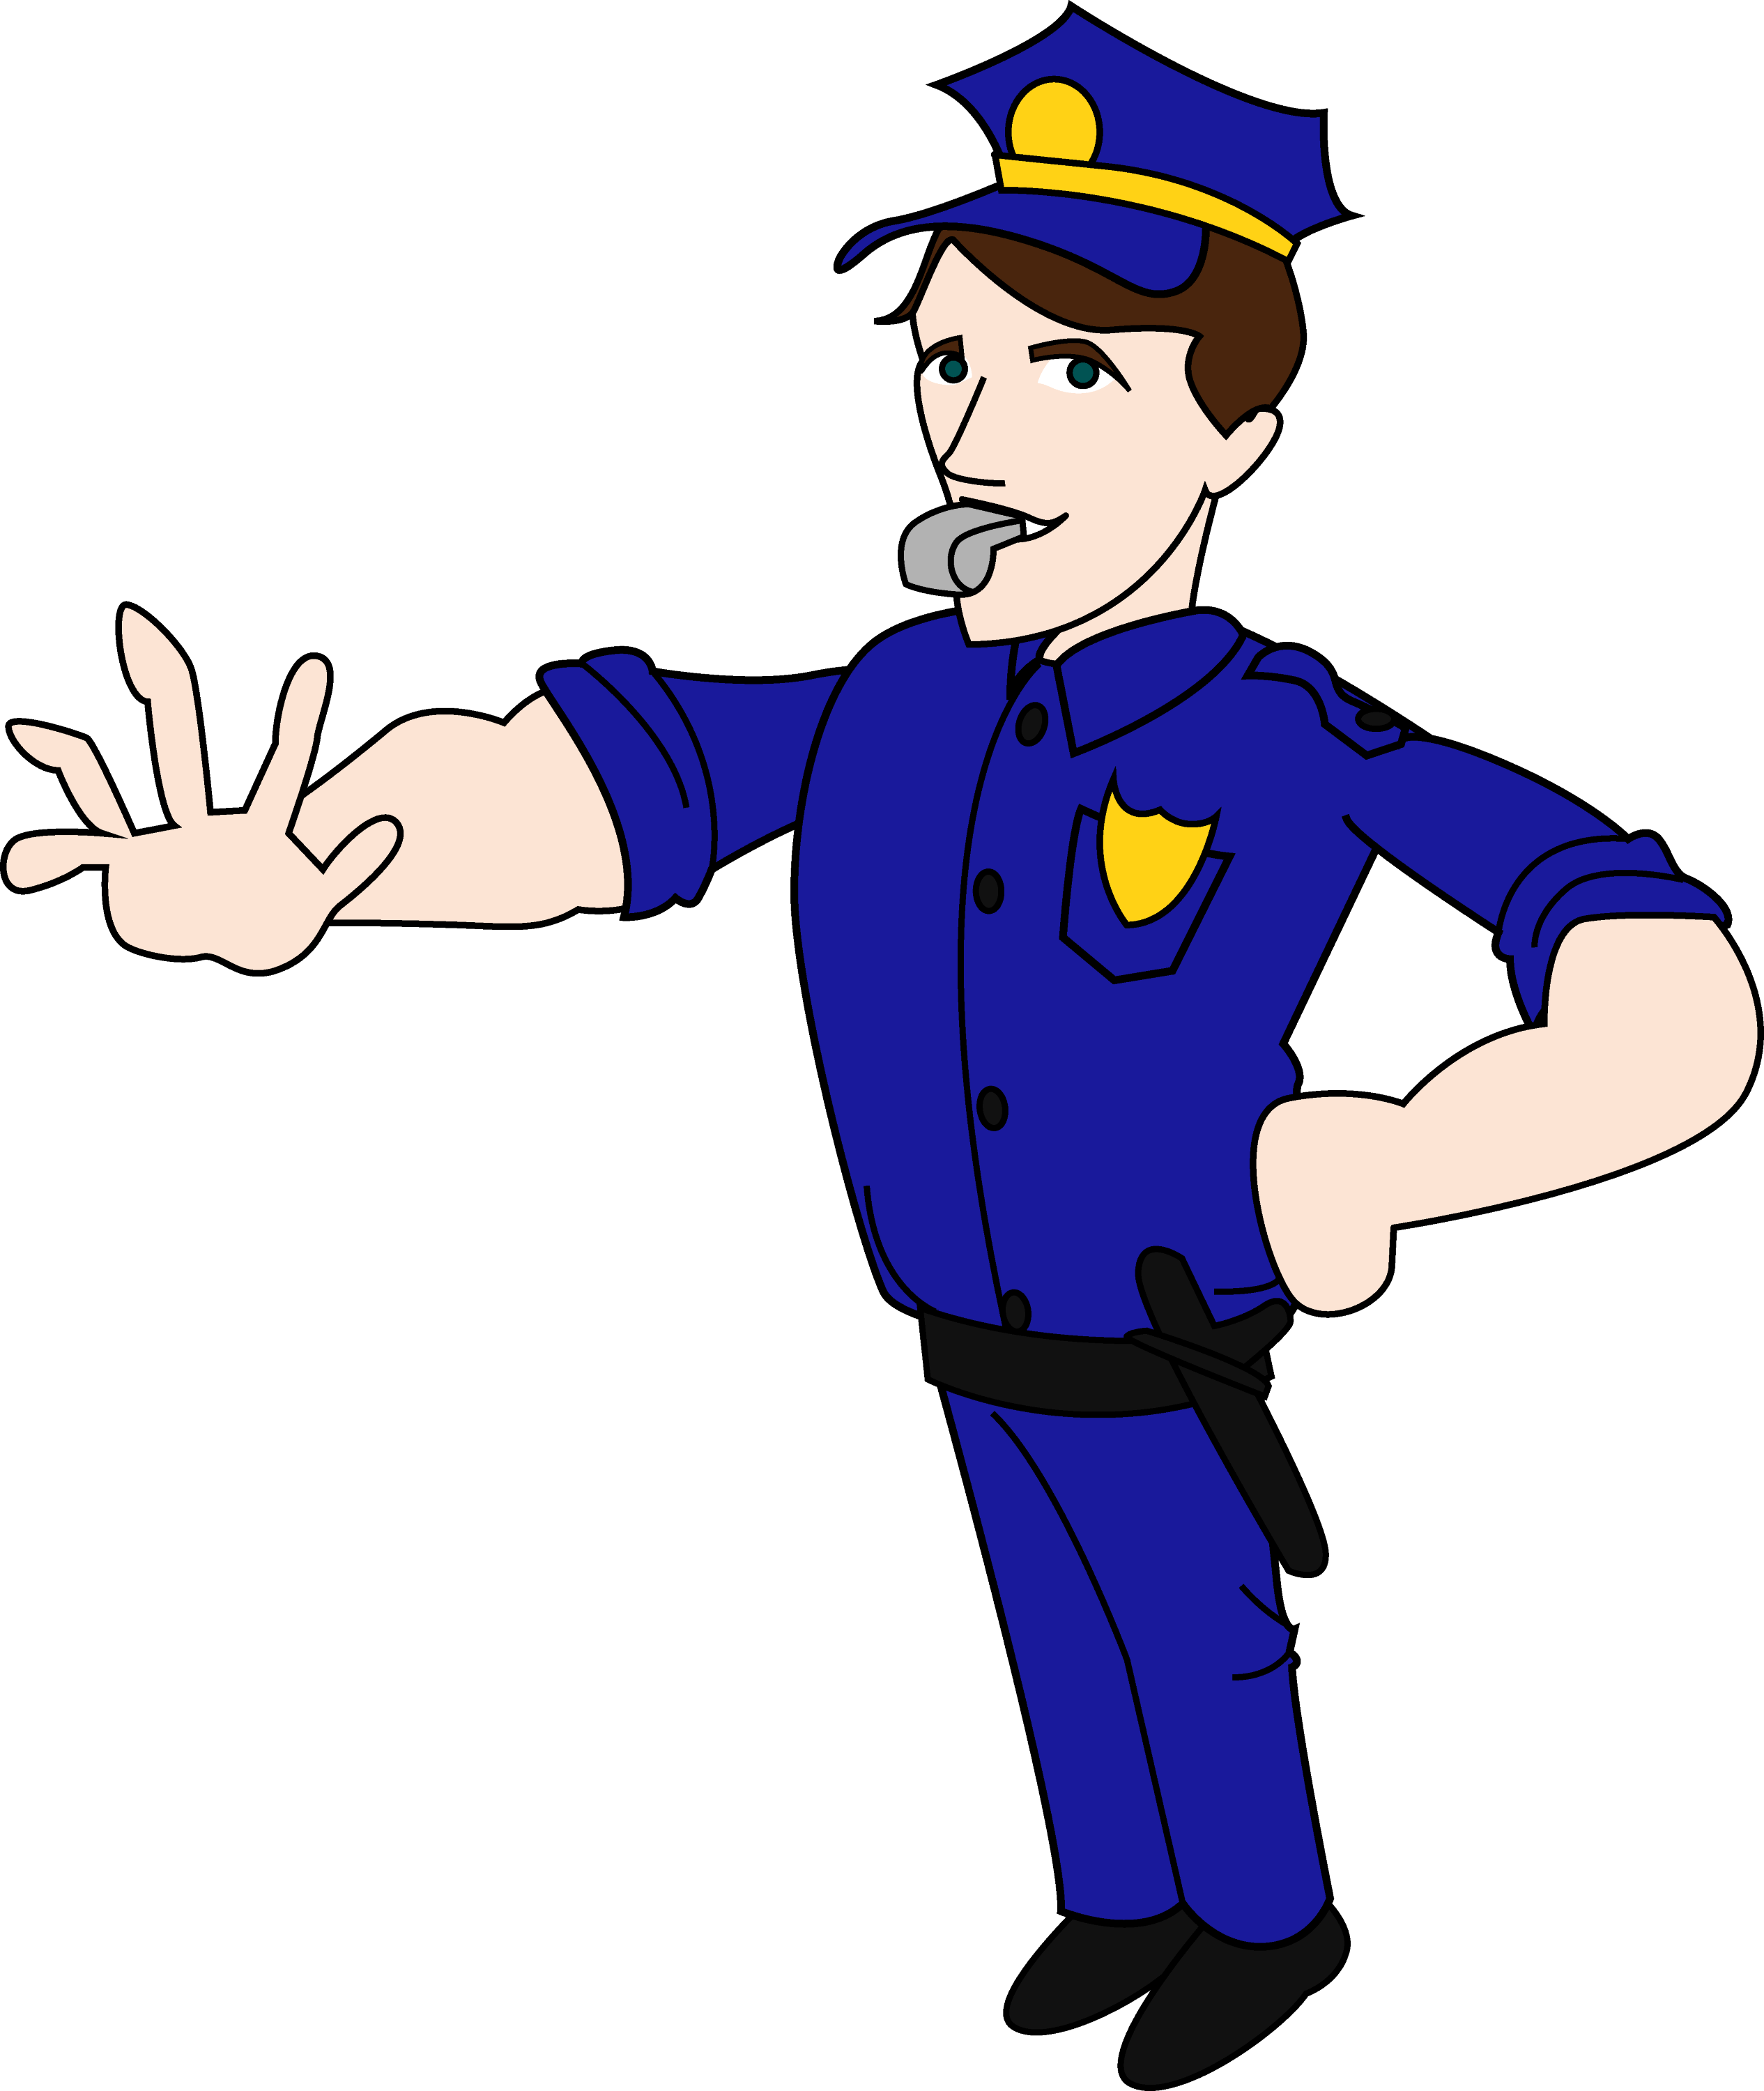 free clipart images policeman - photo #3